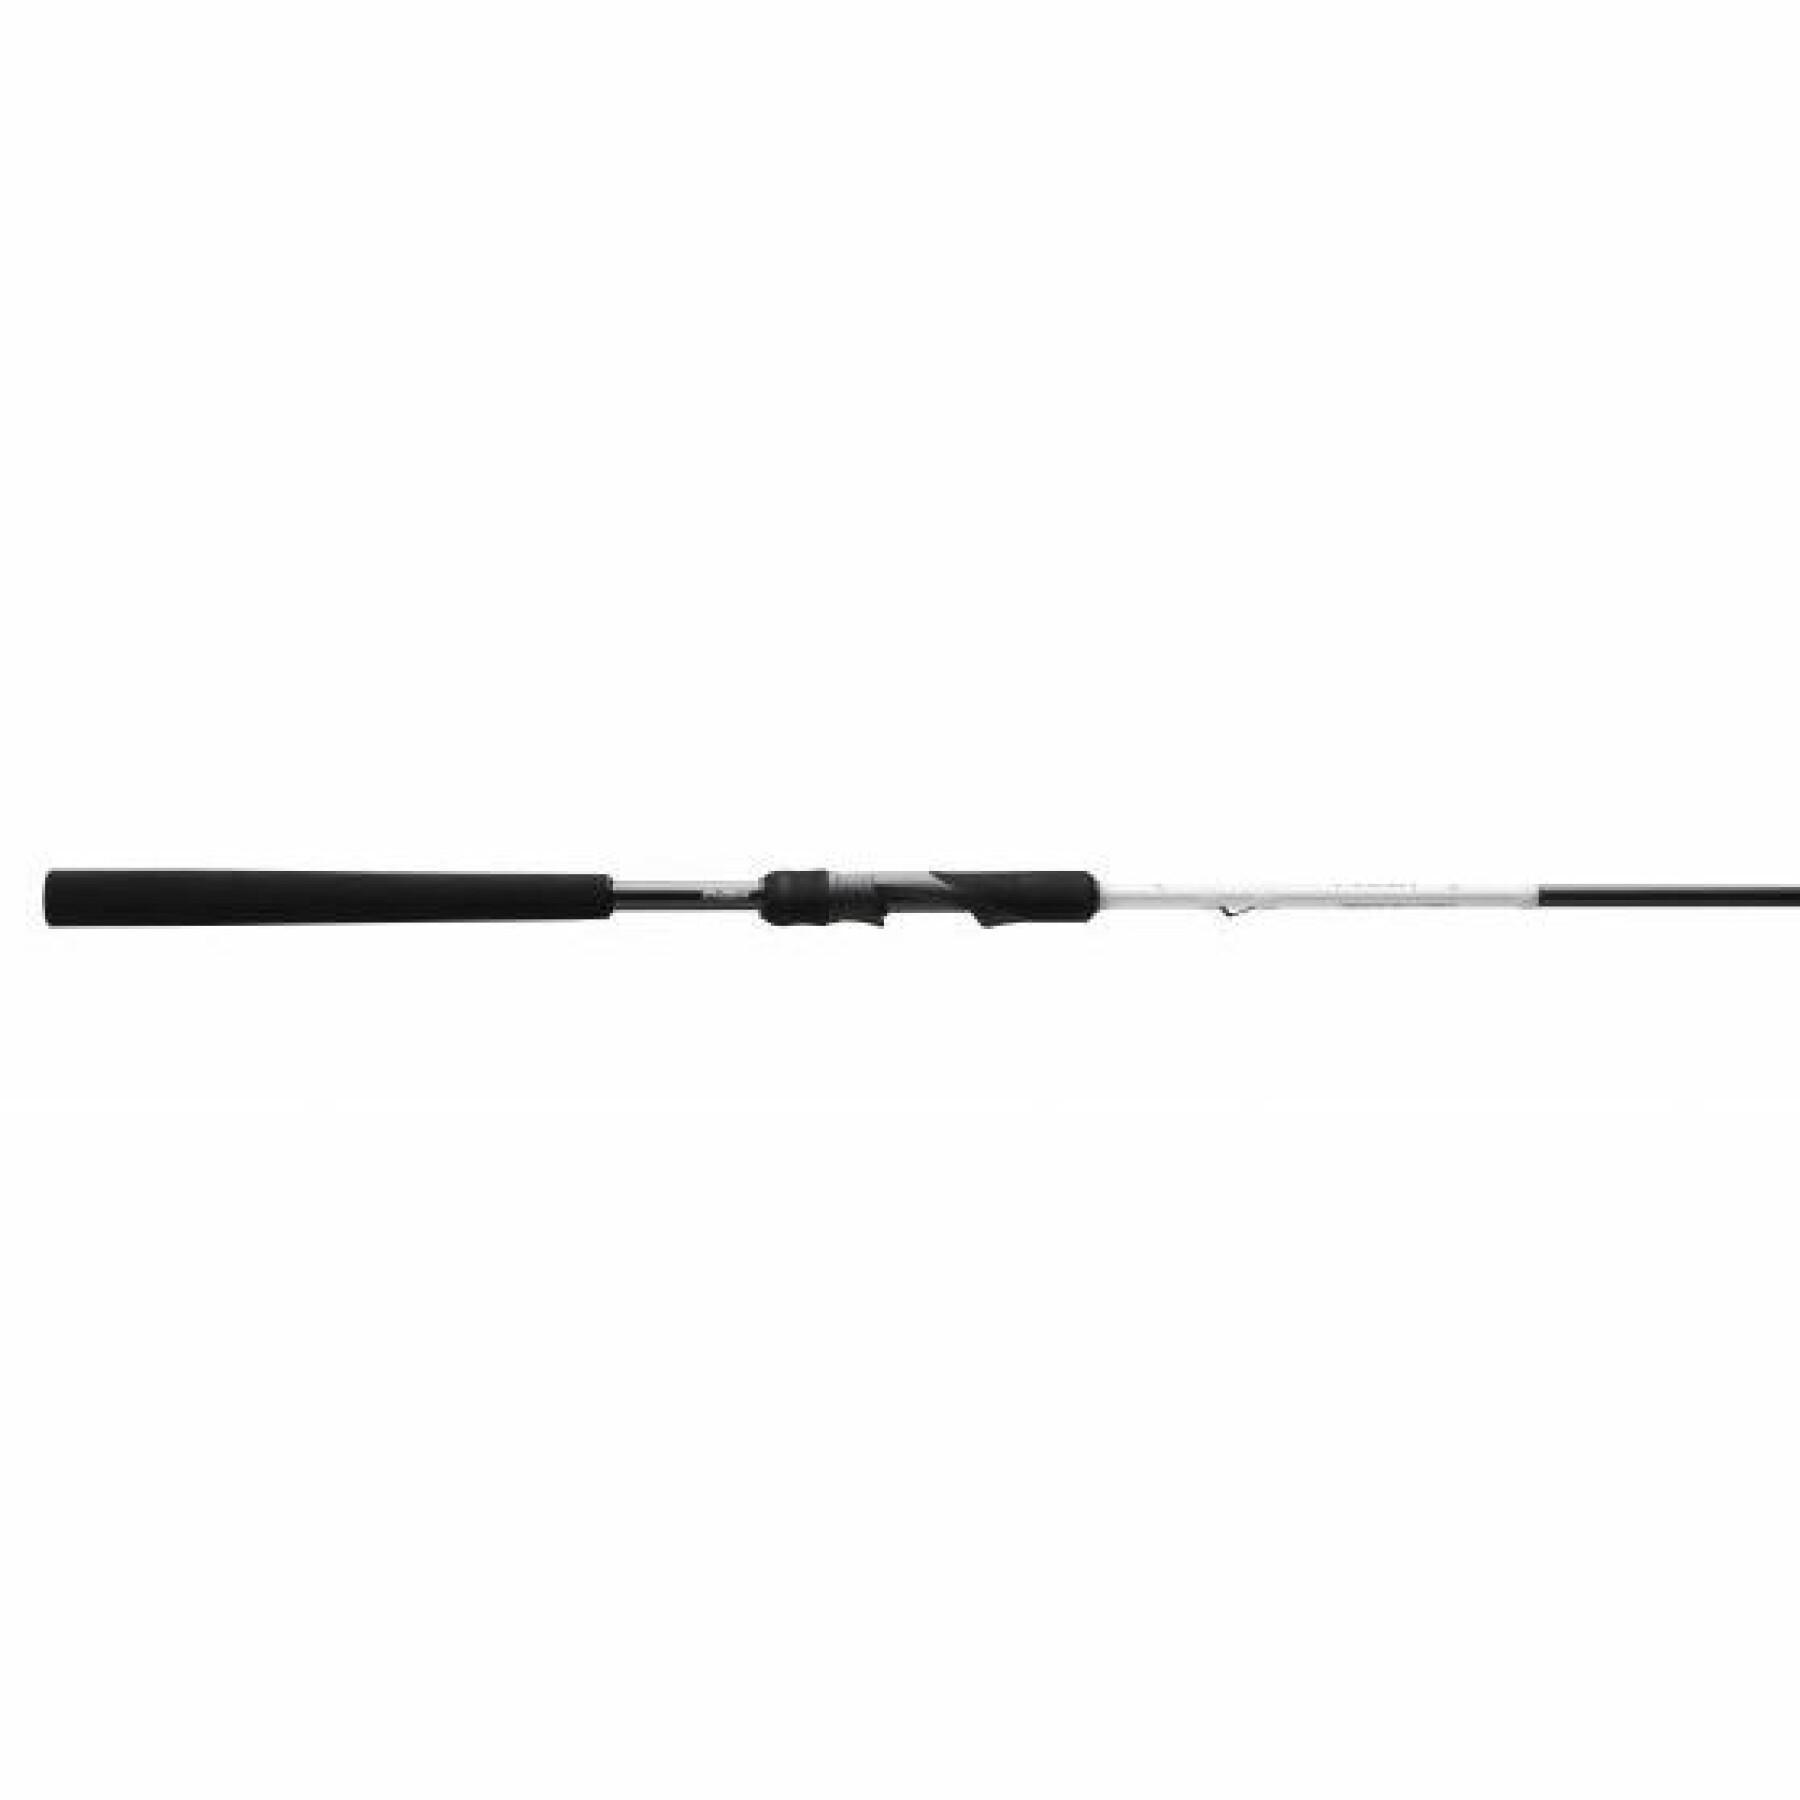 Cane 13 Fishing Rely S Spin 2,69m 15-40g